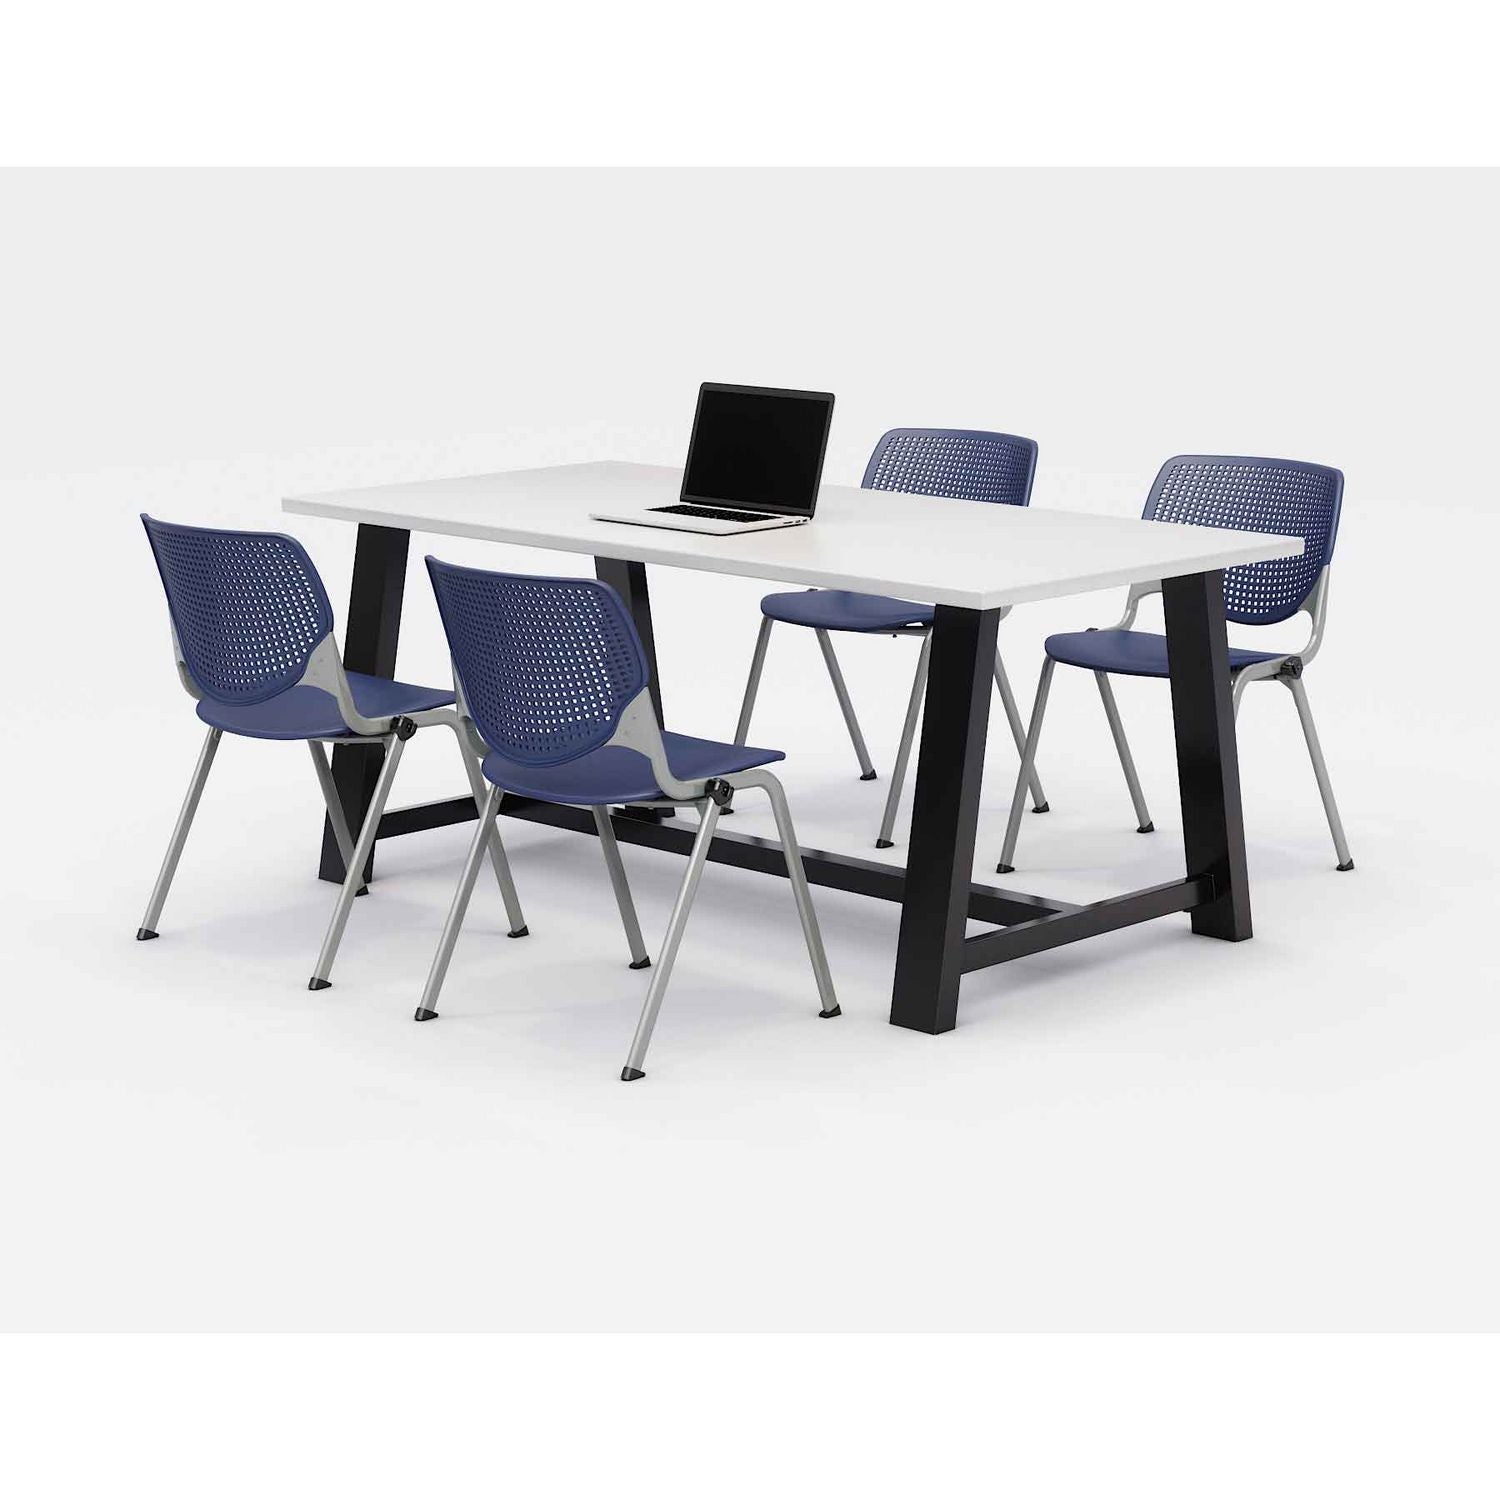 midtown-dining-table-with-four-navy-kool-series-chairs-36-x-72-x-30-designer-white-ships-in-4-6-business-days_kfi840031900241 - 1